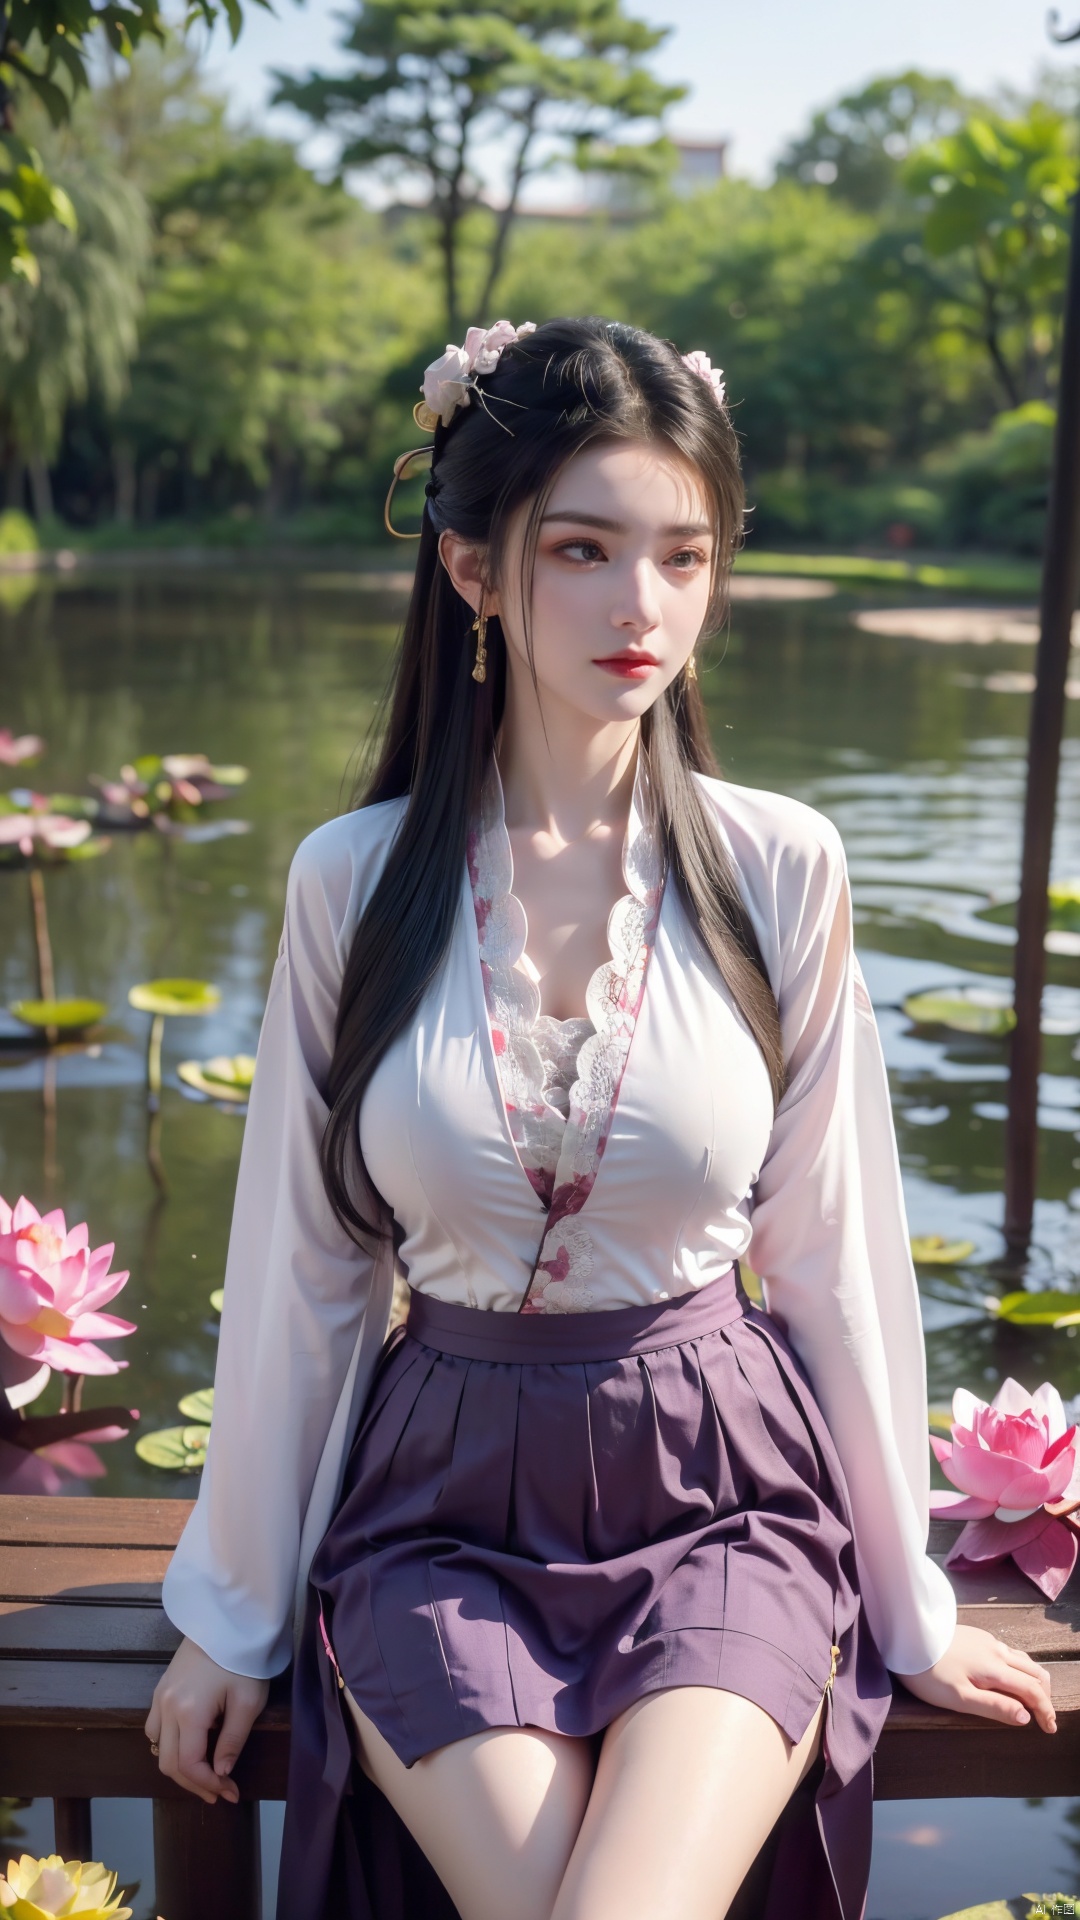  (1girl:1.1), (Lace purple skirt:1.39), on Stomach,aqua_earrings,Lights, lanterns, chang,(big breasts:1.56),hanfu, Best quality, Realistic, photorealistic, masterpiece, extremely detailed CG unity 8k wallpaper, best illumination, best shadow, huge filesize ,(huge breasts:1.56) incredibly absurdres, absurdres, looking at viewer, transparent, smog, gauze, vase, petals, room, ancient Chinese style, detailed background, wide shot background,
(((black hair))),(Sitting on the lotus pond porch:1.49) ,(A pond full of pink lotus flowers:1.5),close up of 1girl,Hairpins,hair ornament,hair wings,slim,narrow waist,perfect eyes,beautiful perfect face,pleasant smile,perfect female figure,detailed skin,charming,alluring,seductive,erotic,enchanting,delicate pattern,detailed complex and rich exquisite clothing detail,delicate intricate fabrics,
Morning Serenade In the gentle morning glow, (a woman in a pink lotus-patterned Hanfu stands in an indoor courtyard:1.36),(Chinese traditional dragon and phoenix embroidered Hanfu:1.3), admiring the tranquil garden scenery. The lotus-patterned Hanfu, embellished with silver-thread embroidery, is softly illuminated by the morning light. The light mint green Hanfu imparts a sense of calm and freshness, adorned with delicate lotus patterns, with a blurred background to enhance the peaceful atmosphere,